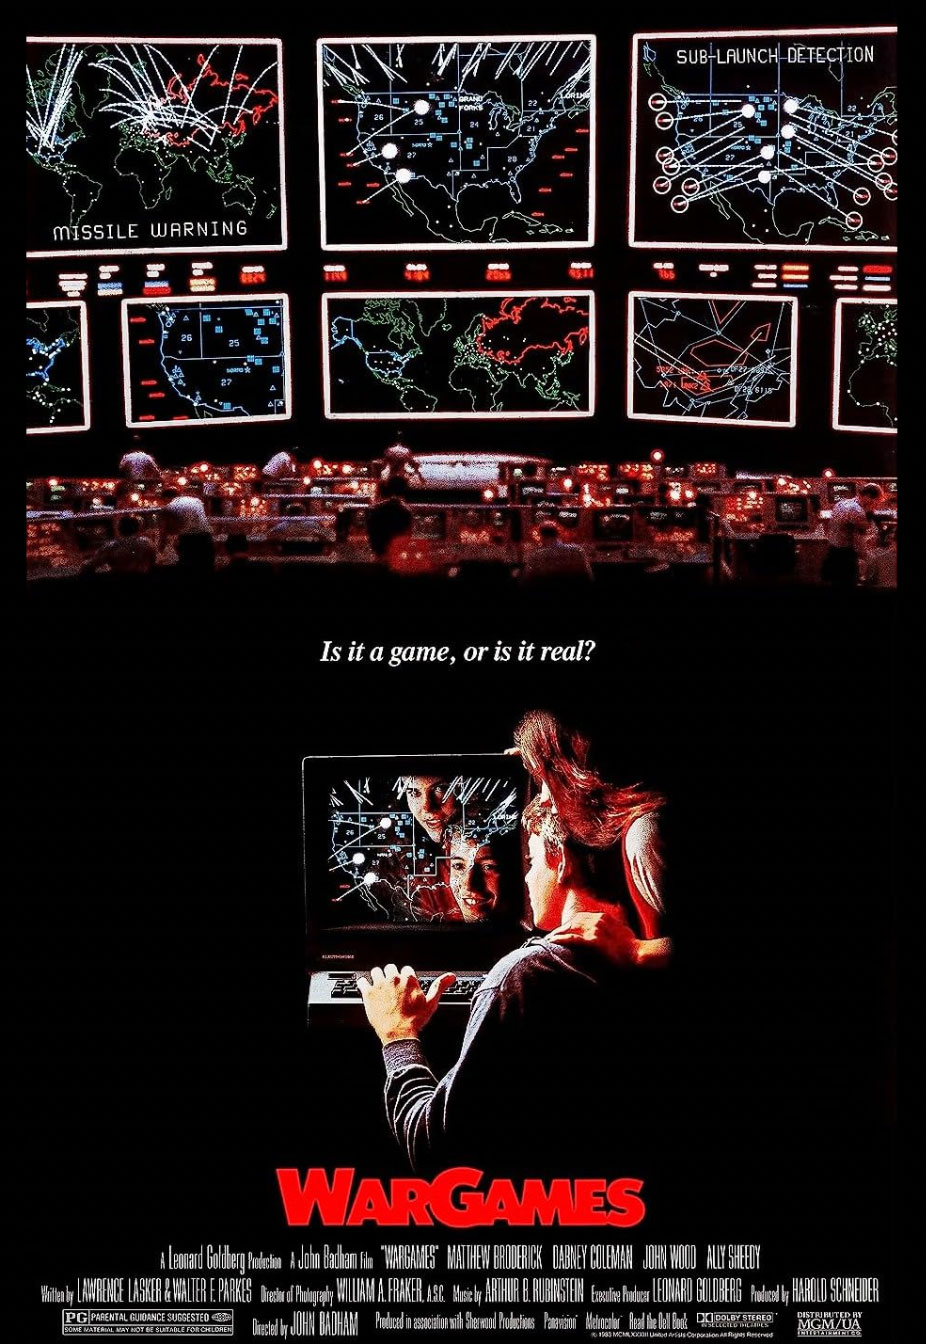 Movie poster for WarGames featuring many screens and a man on a computer.